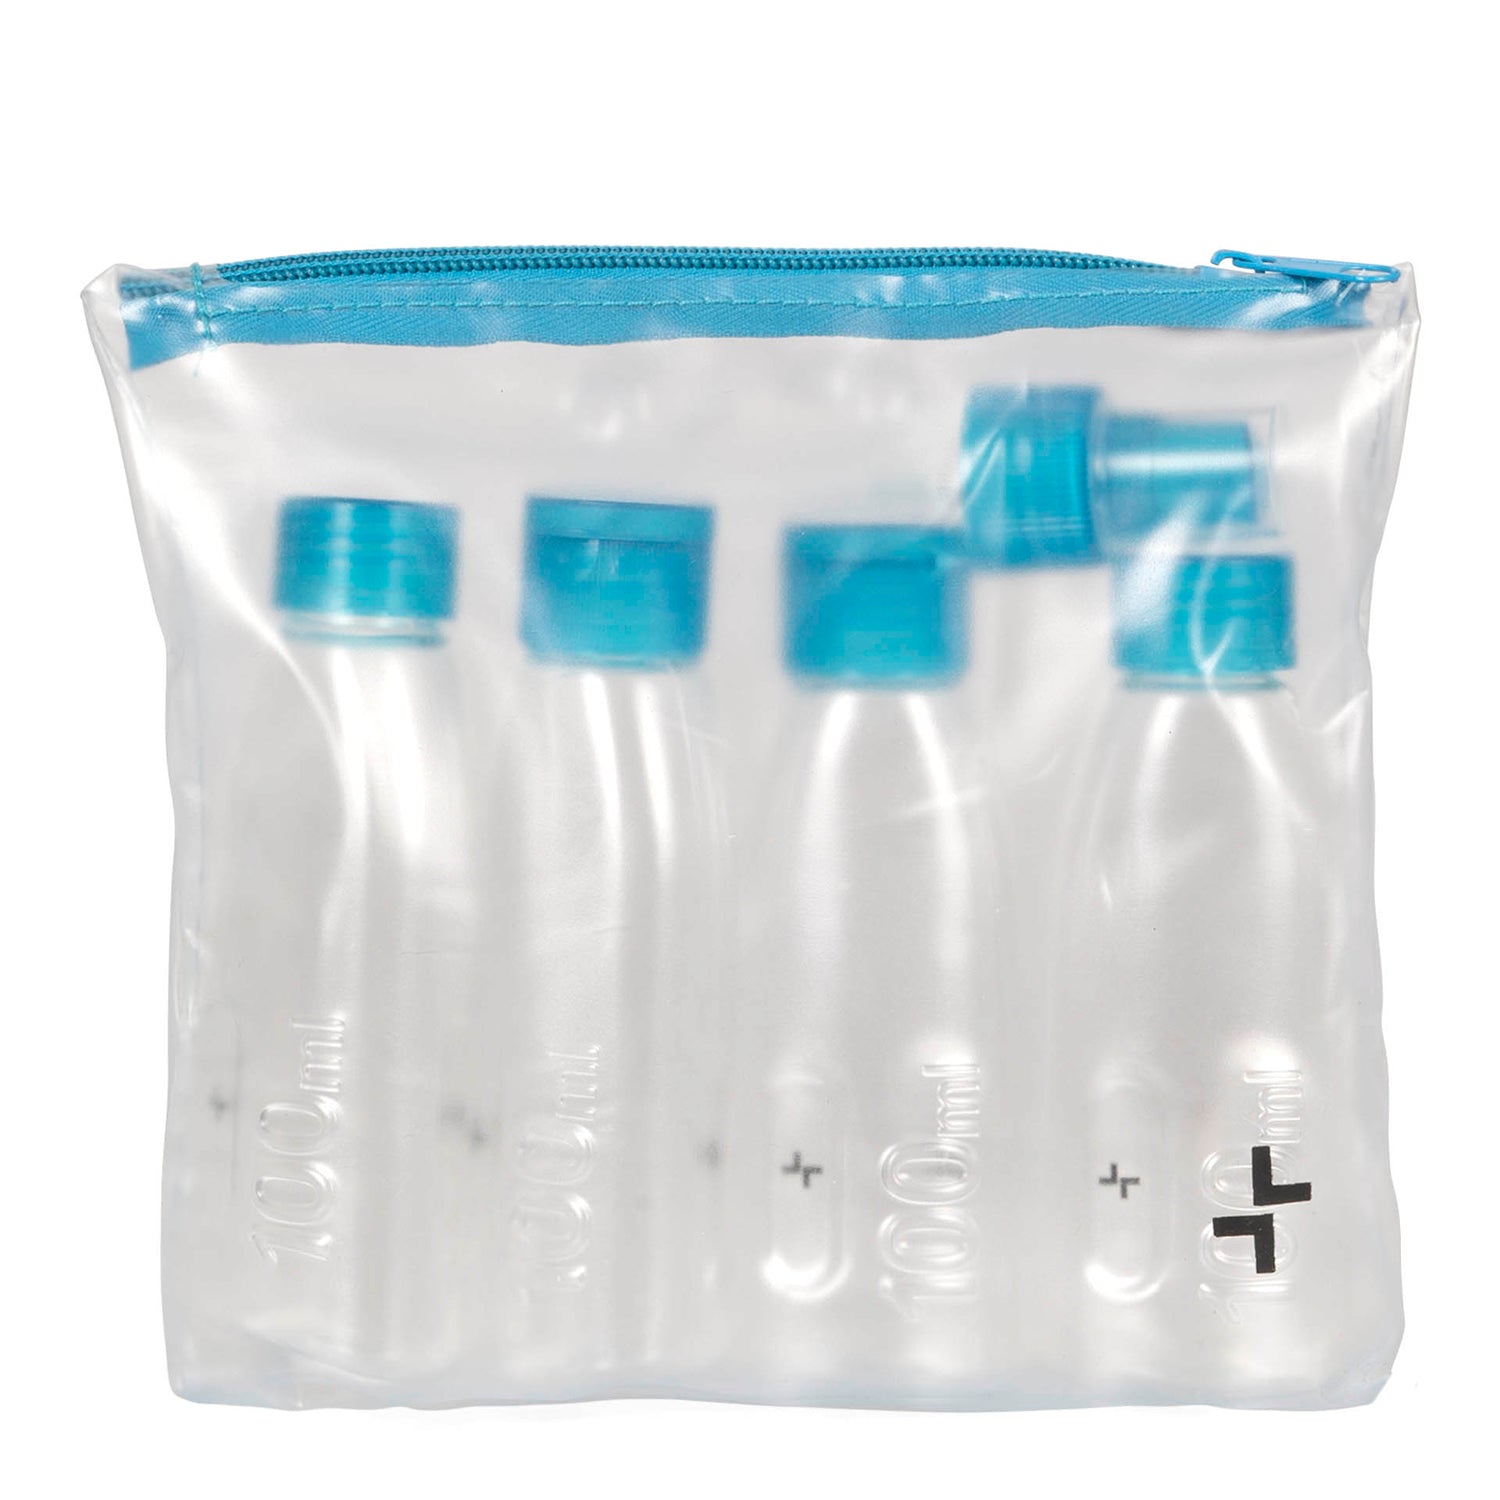 4 bottle set with spray nozzle inside a matt plastic bag that has a zipper closure and logo of travel brand Tracker, all on a white background.